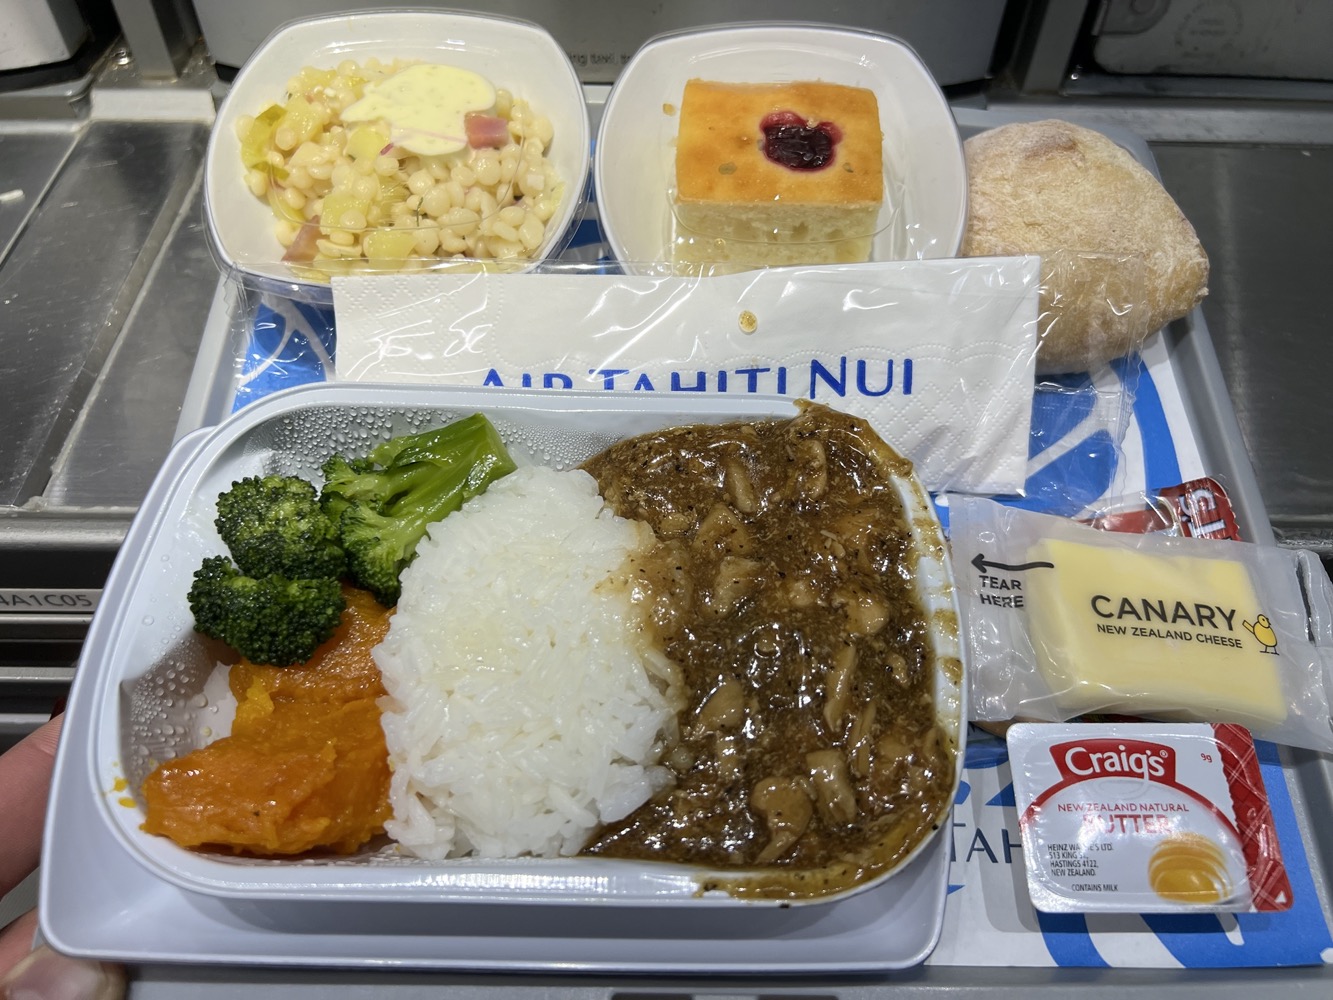 Air Tahiti Nui Economy Class meal tray. Only one choice - Black bean sauce chicken with rice
